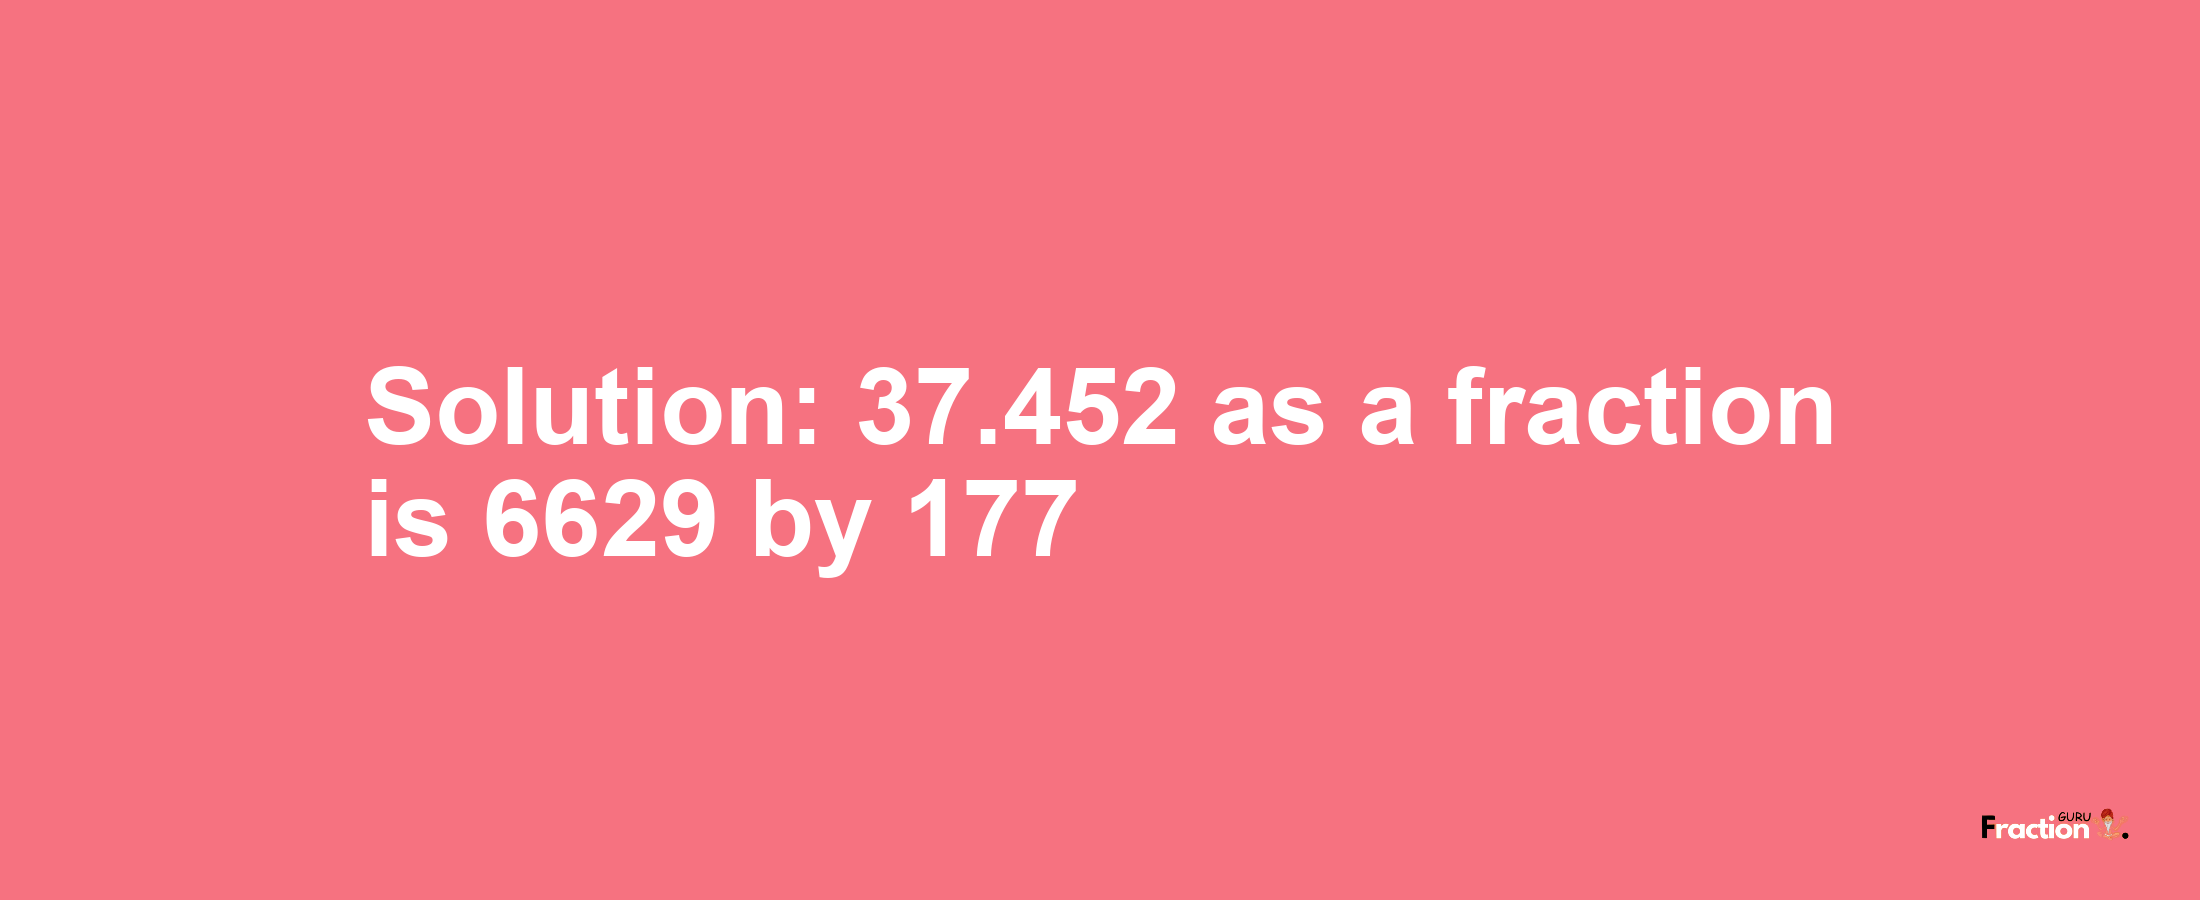 Solution:37.452 as a fraction is 6629/177